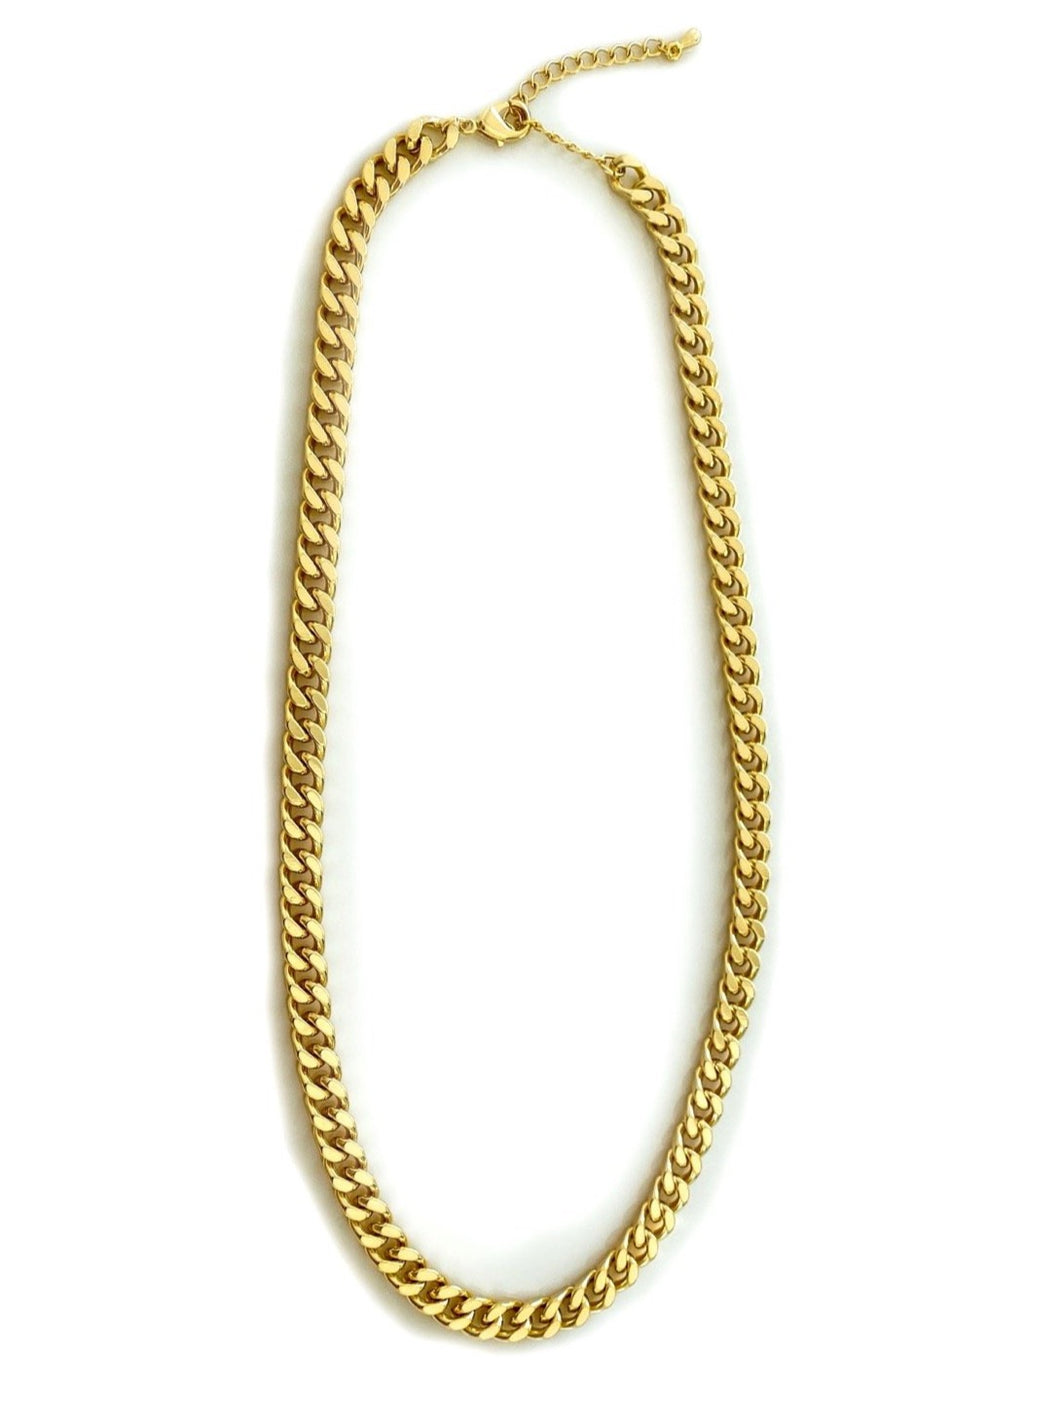 Cuban Link Chain gold plated